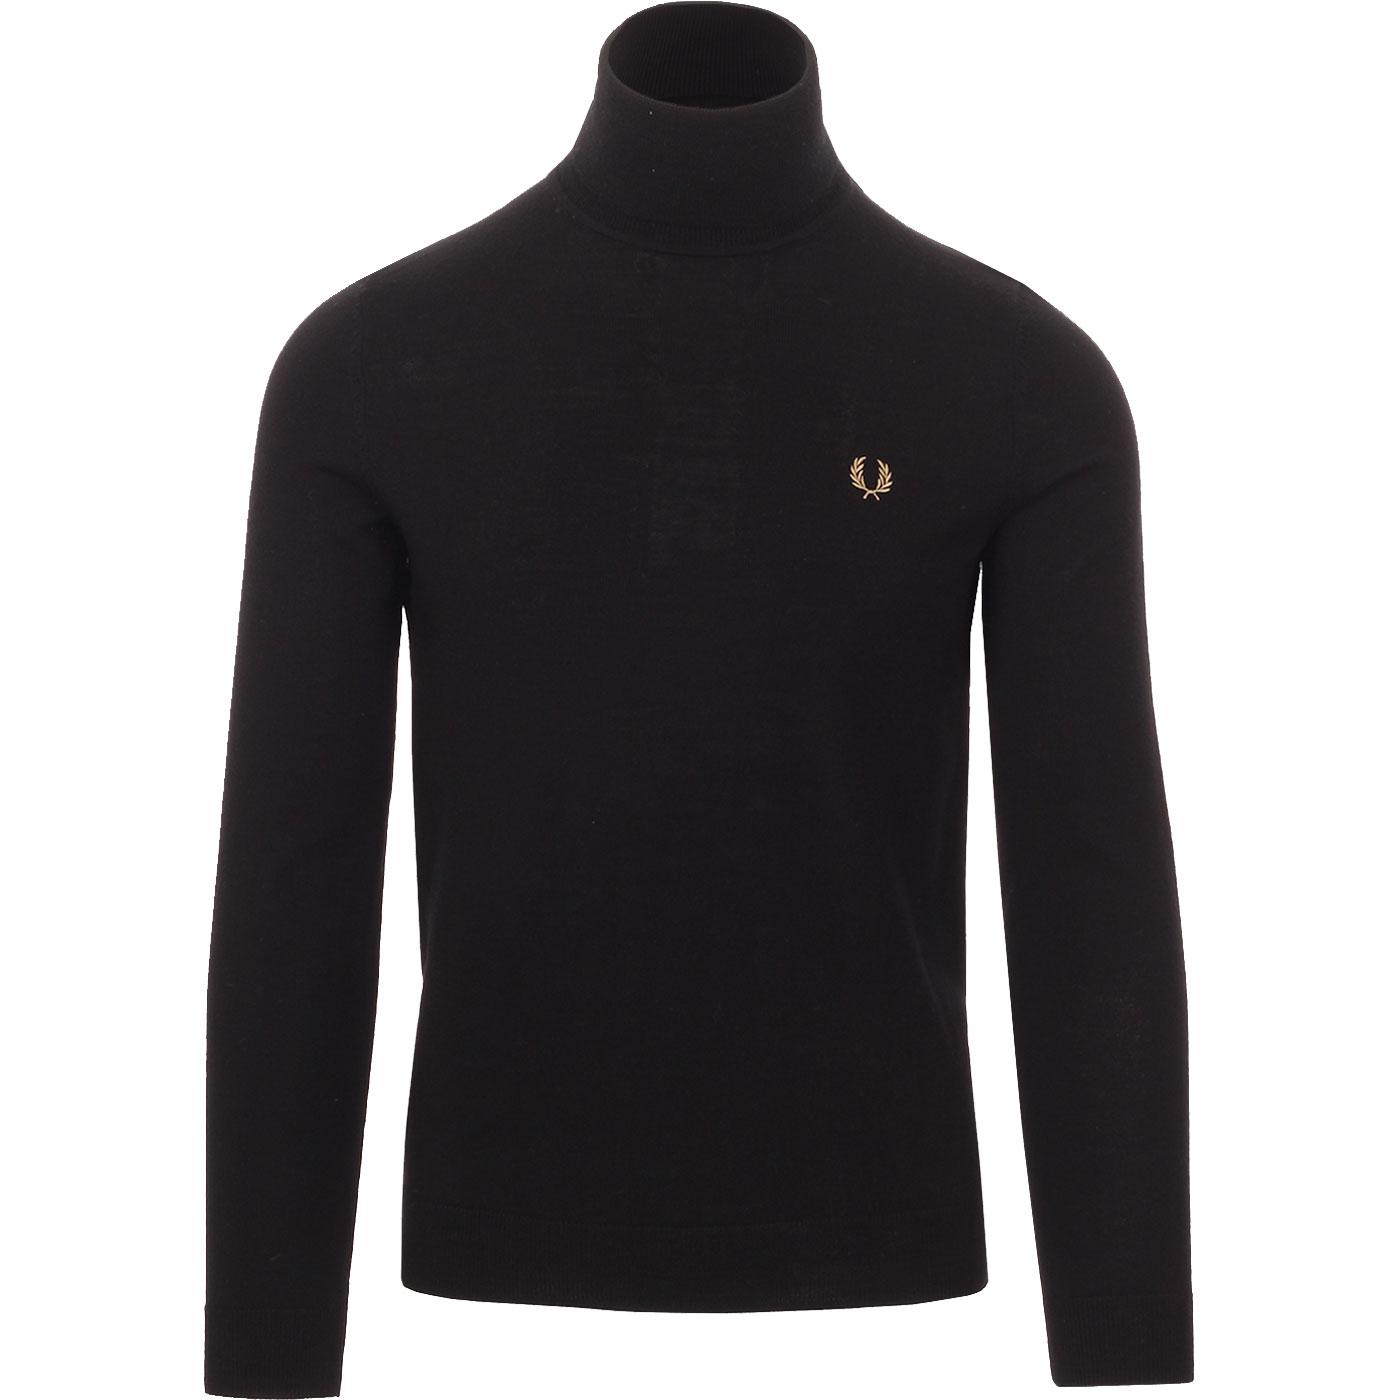 FRED PERRY 60's Mod Merino Wool Roll Neck Jumper